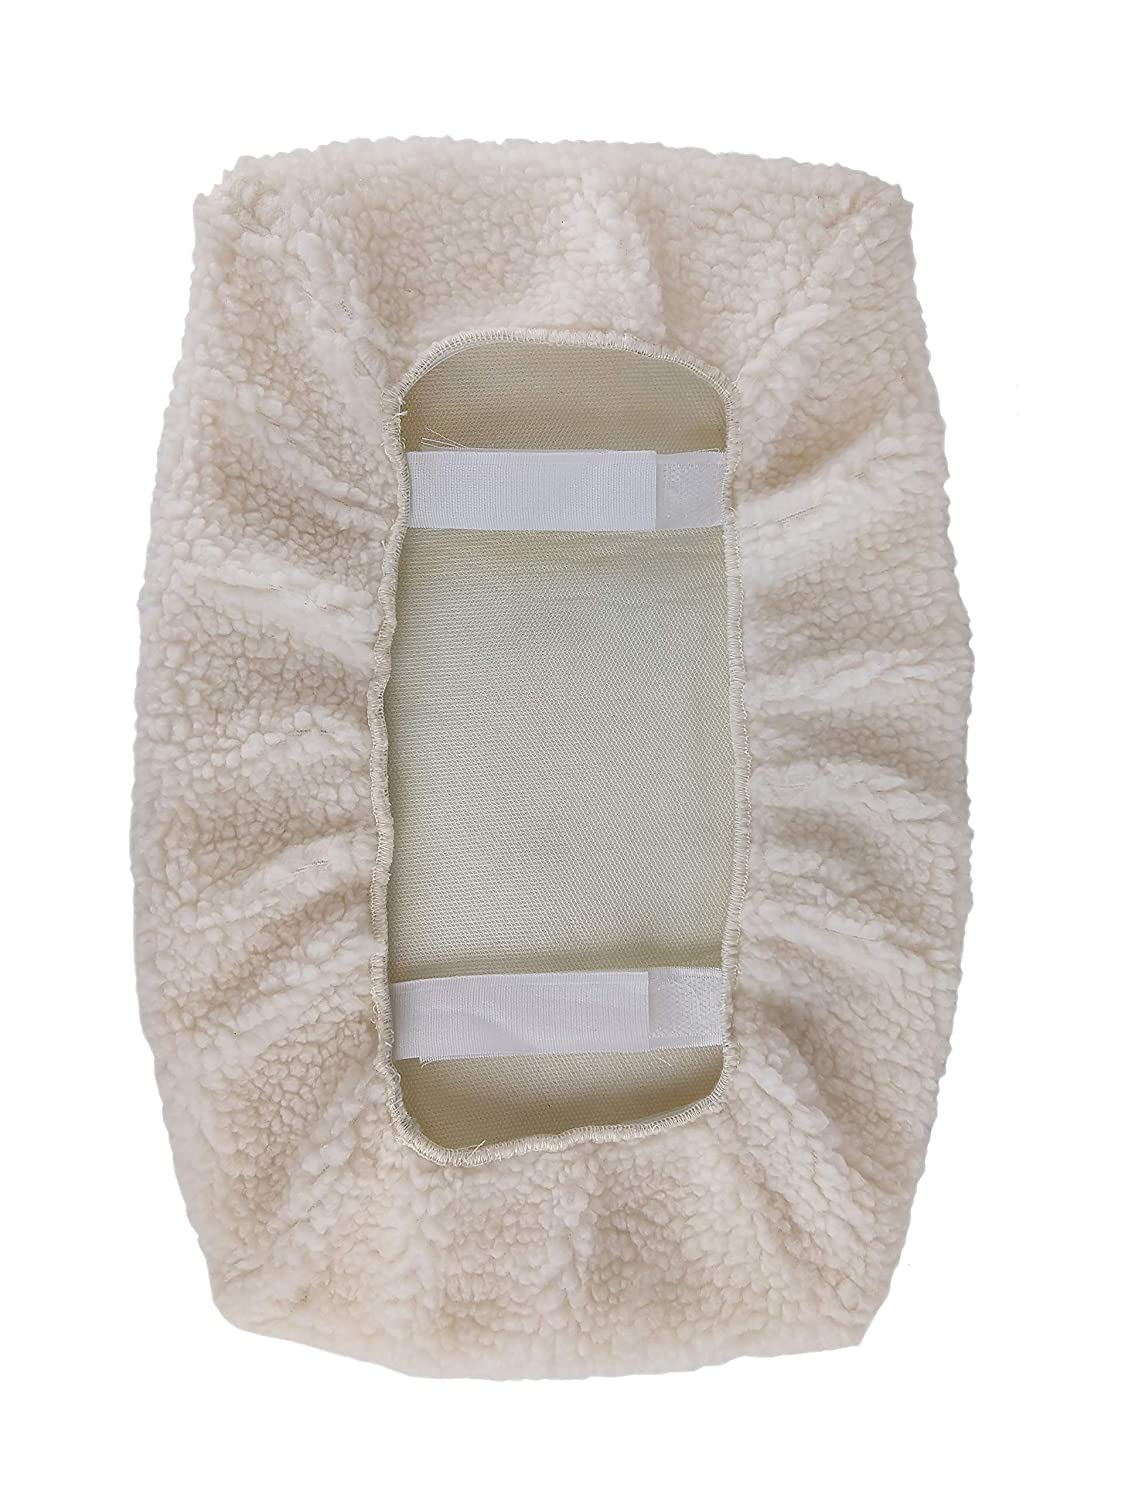 SOFT n PLUSH Comfort Knee Pad for Knee Scooters